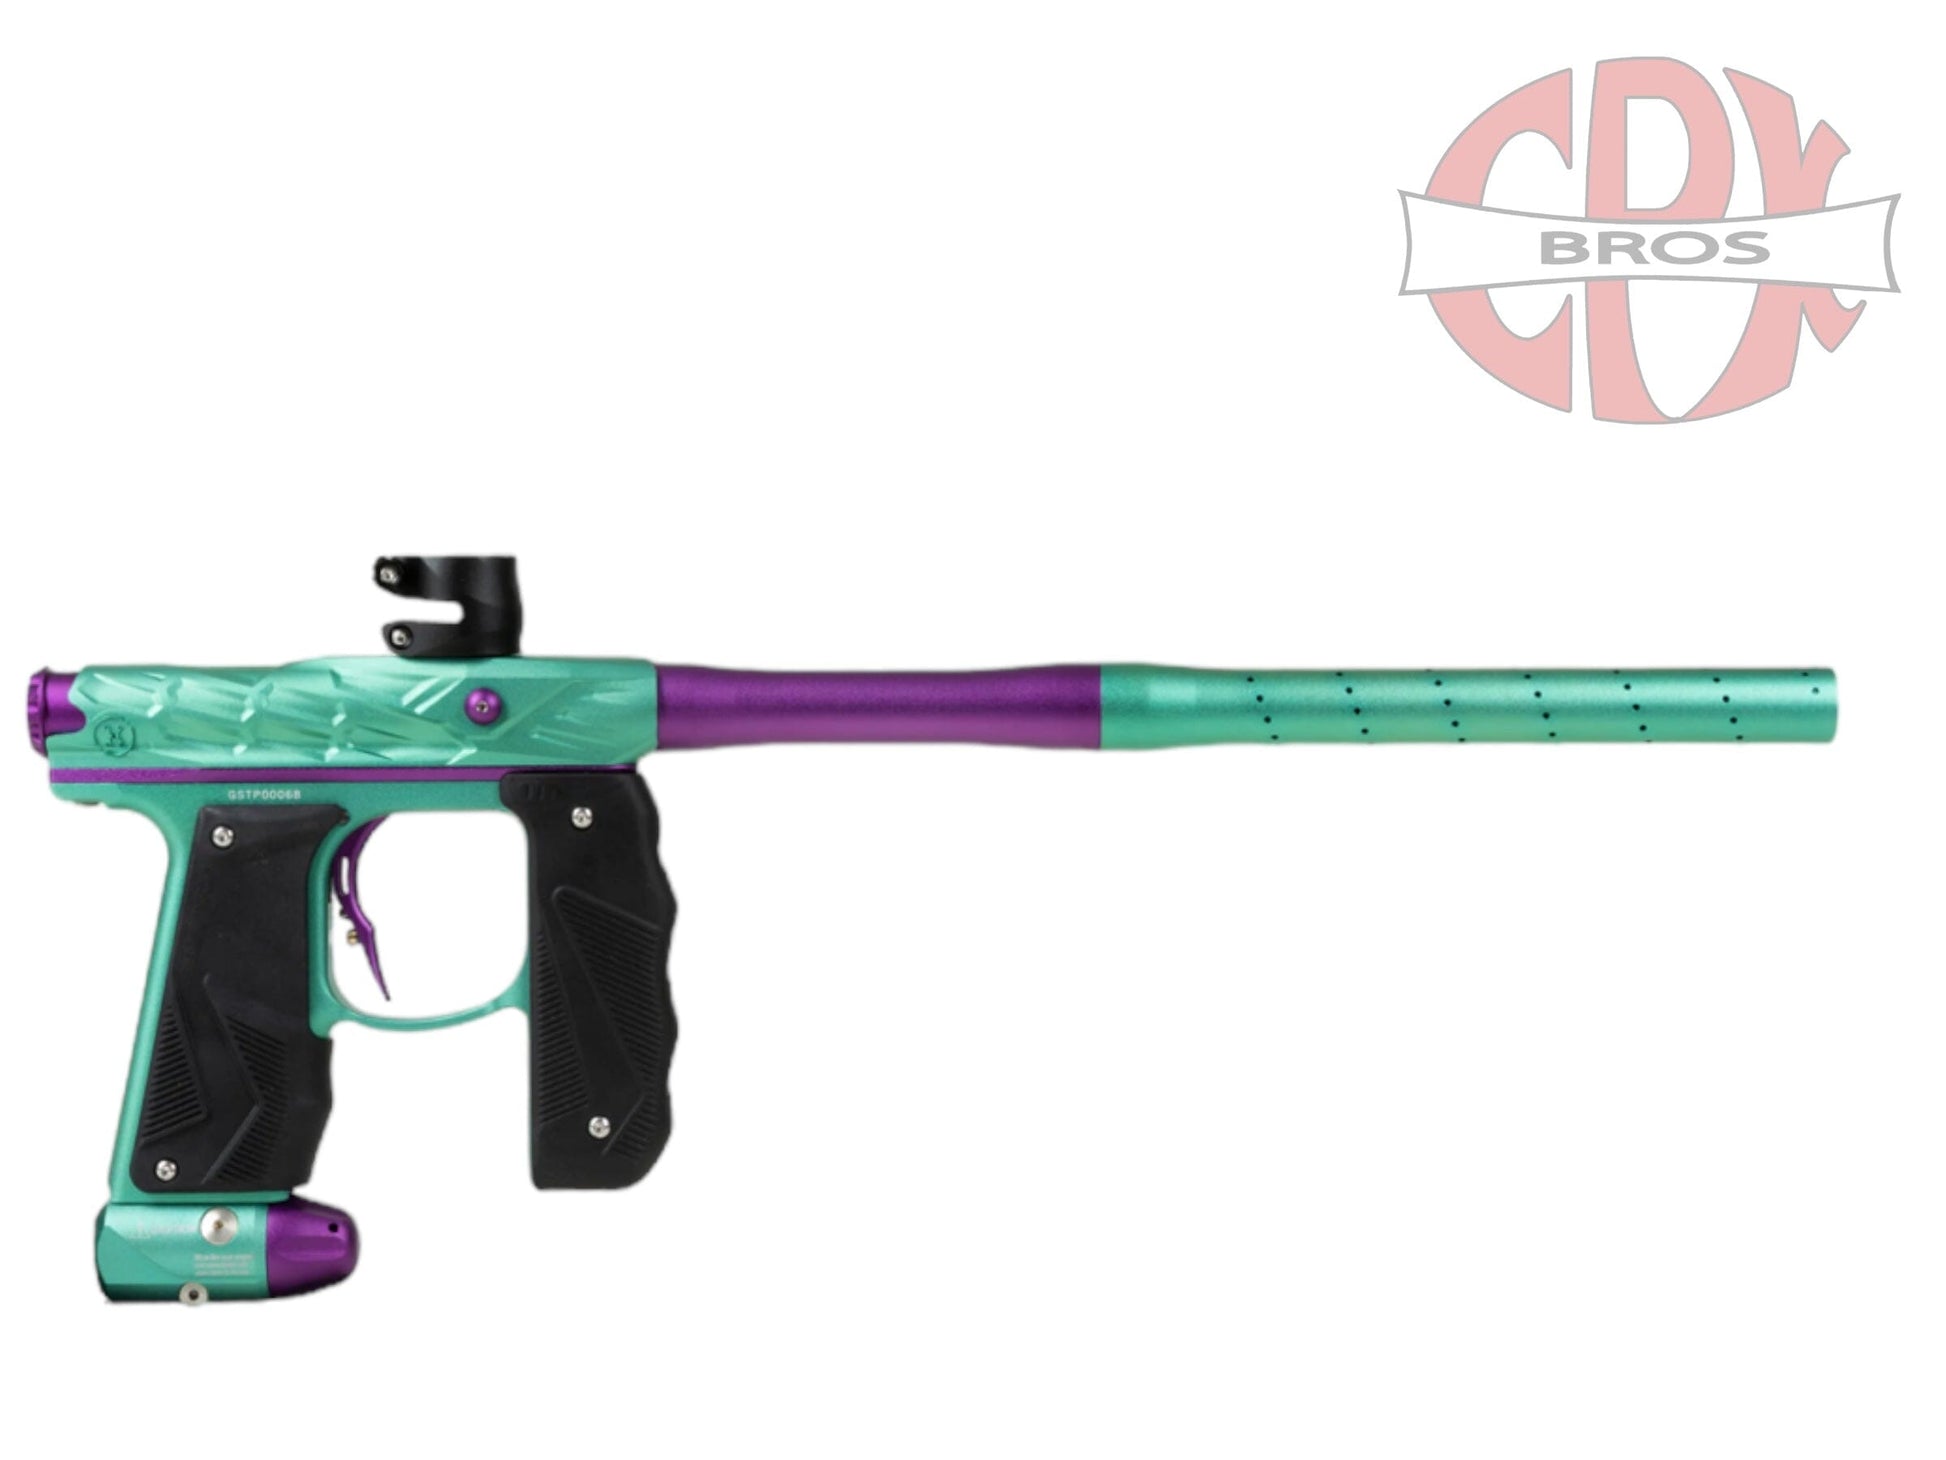 Used HK HIVE MINI GS - TEAL/PURPLE Paintball Gun from CPXBrosPaintball Buy/Sell/Trade Paintball Markers, Paintball Hoppers, Paintball Masks, and Hormesis Headbands